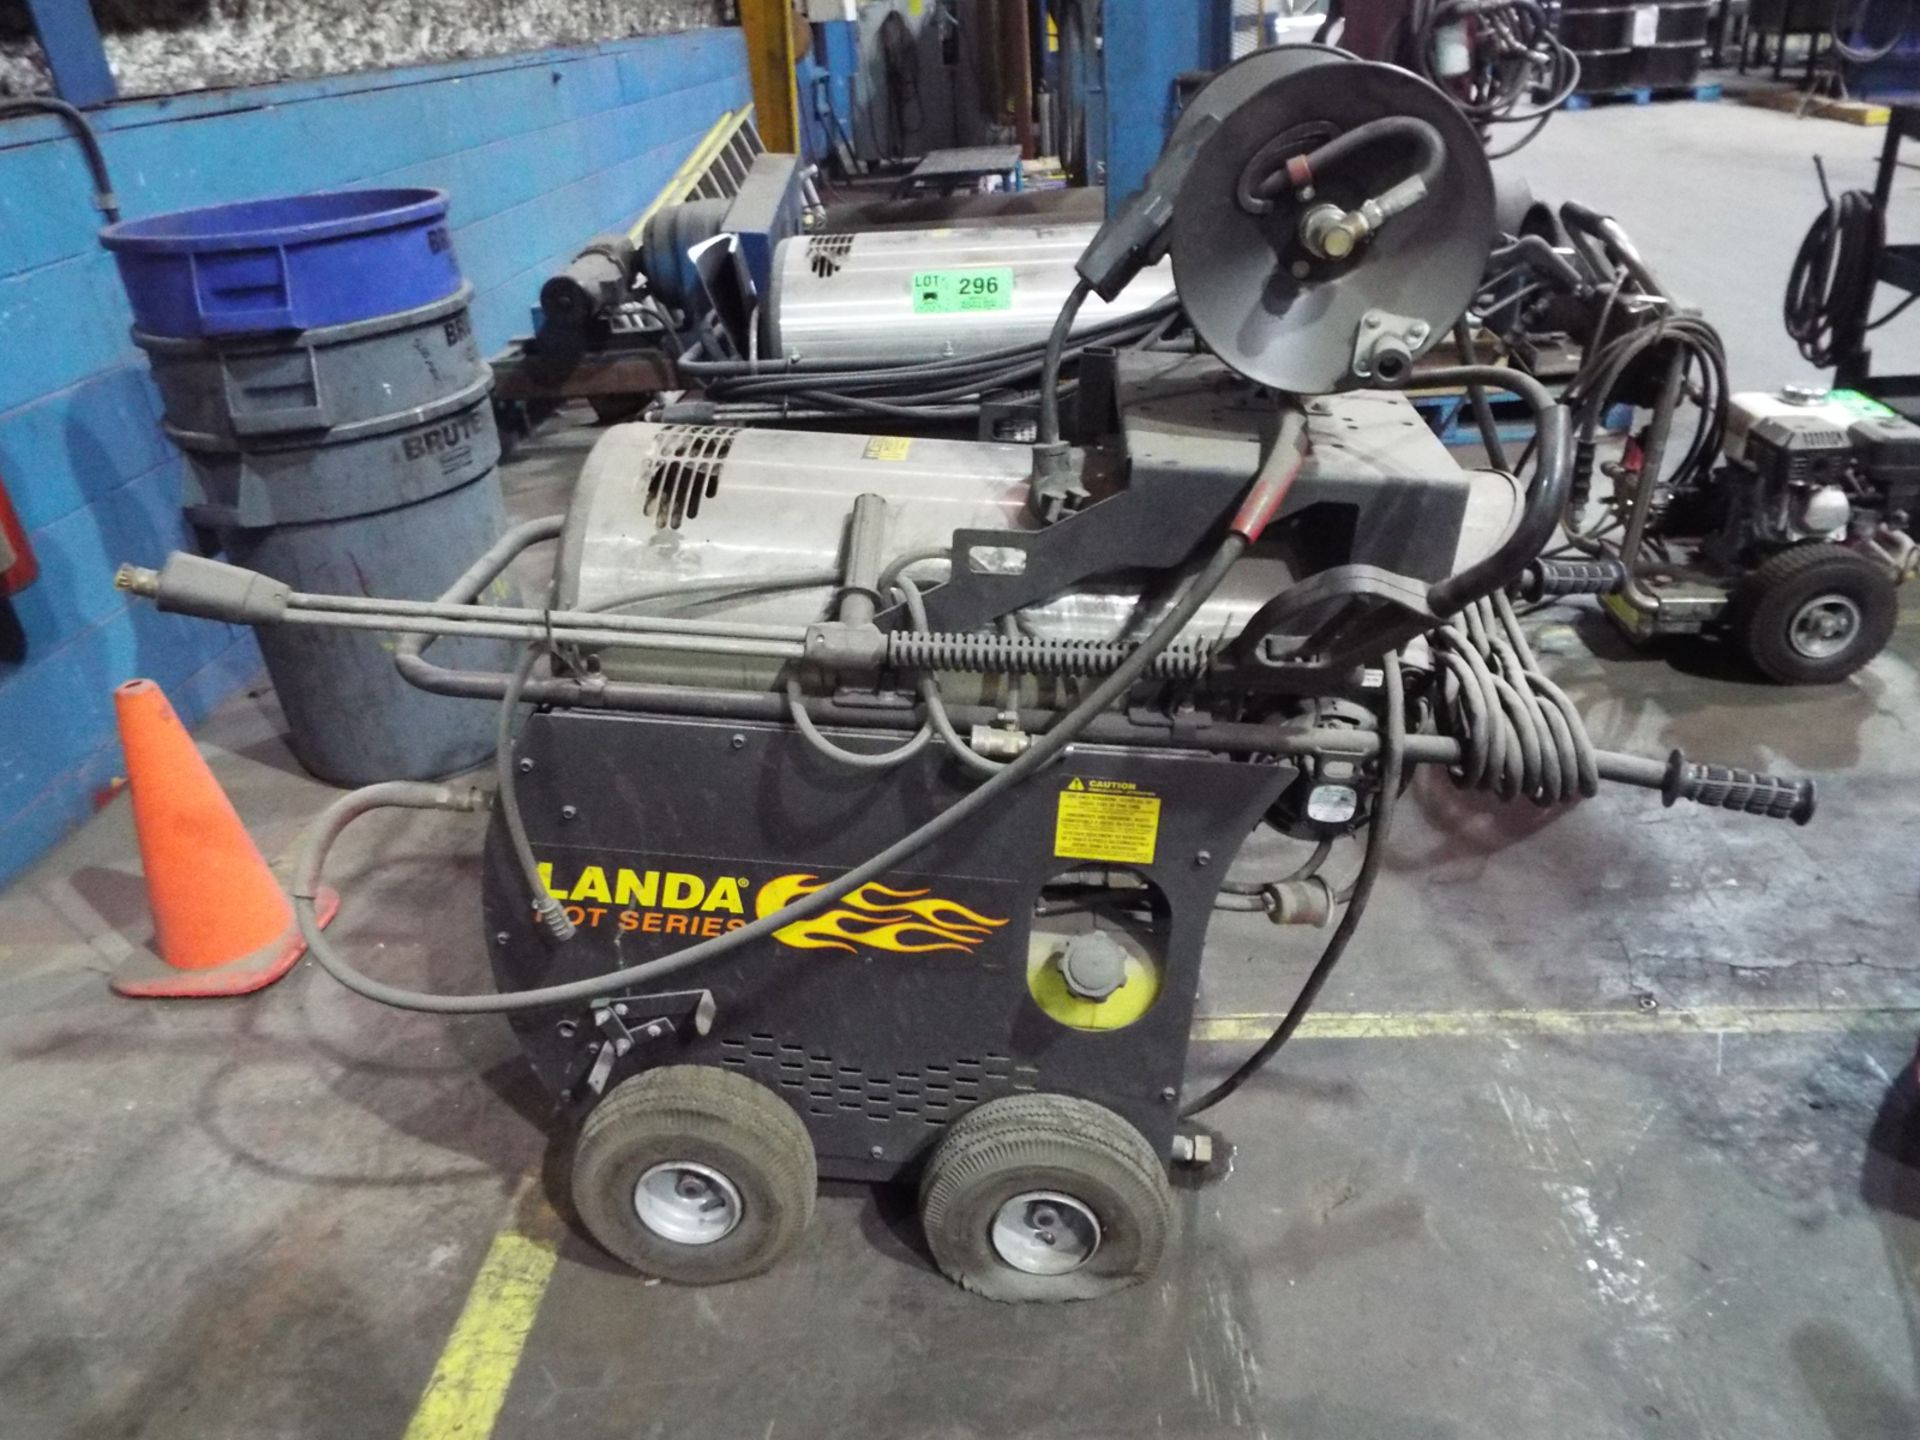 LANDA HOT SERIES HEATED PORTABLE PRESSURE WASHER WITH 225 DEG. F. MAX. TEMPERATURE - Image 3 of 4